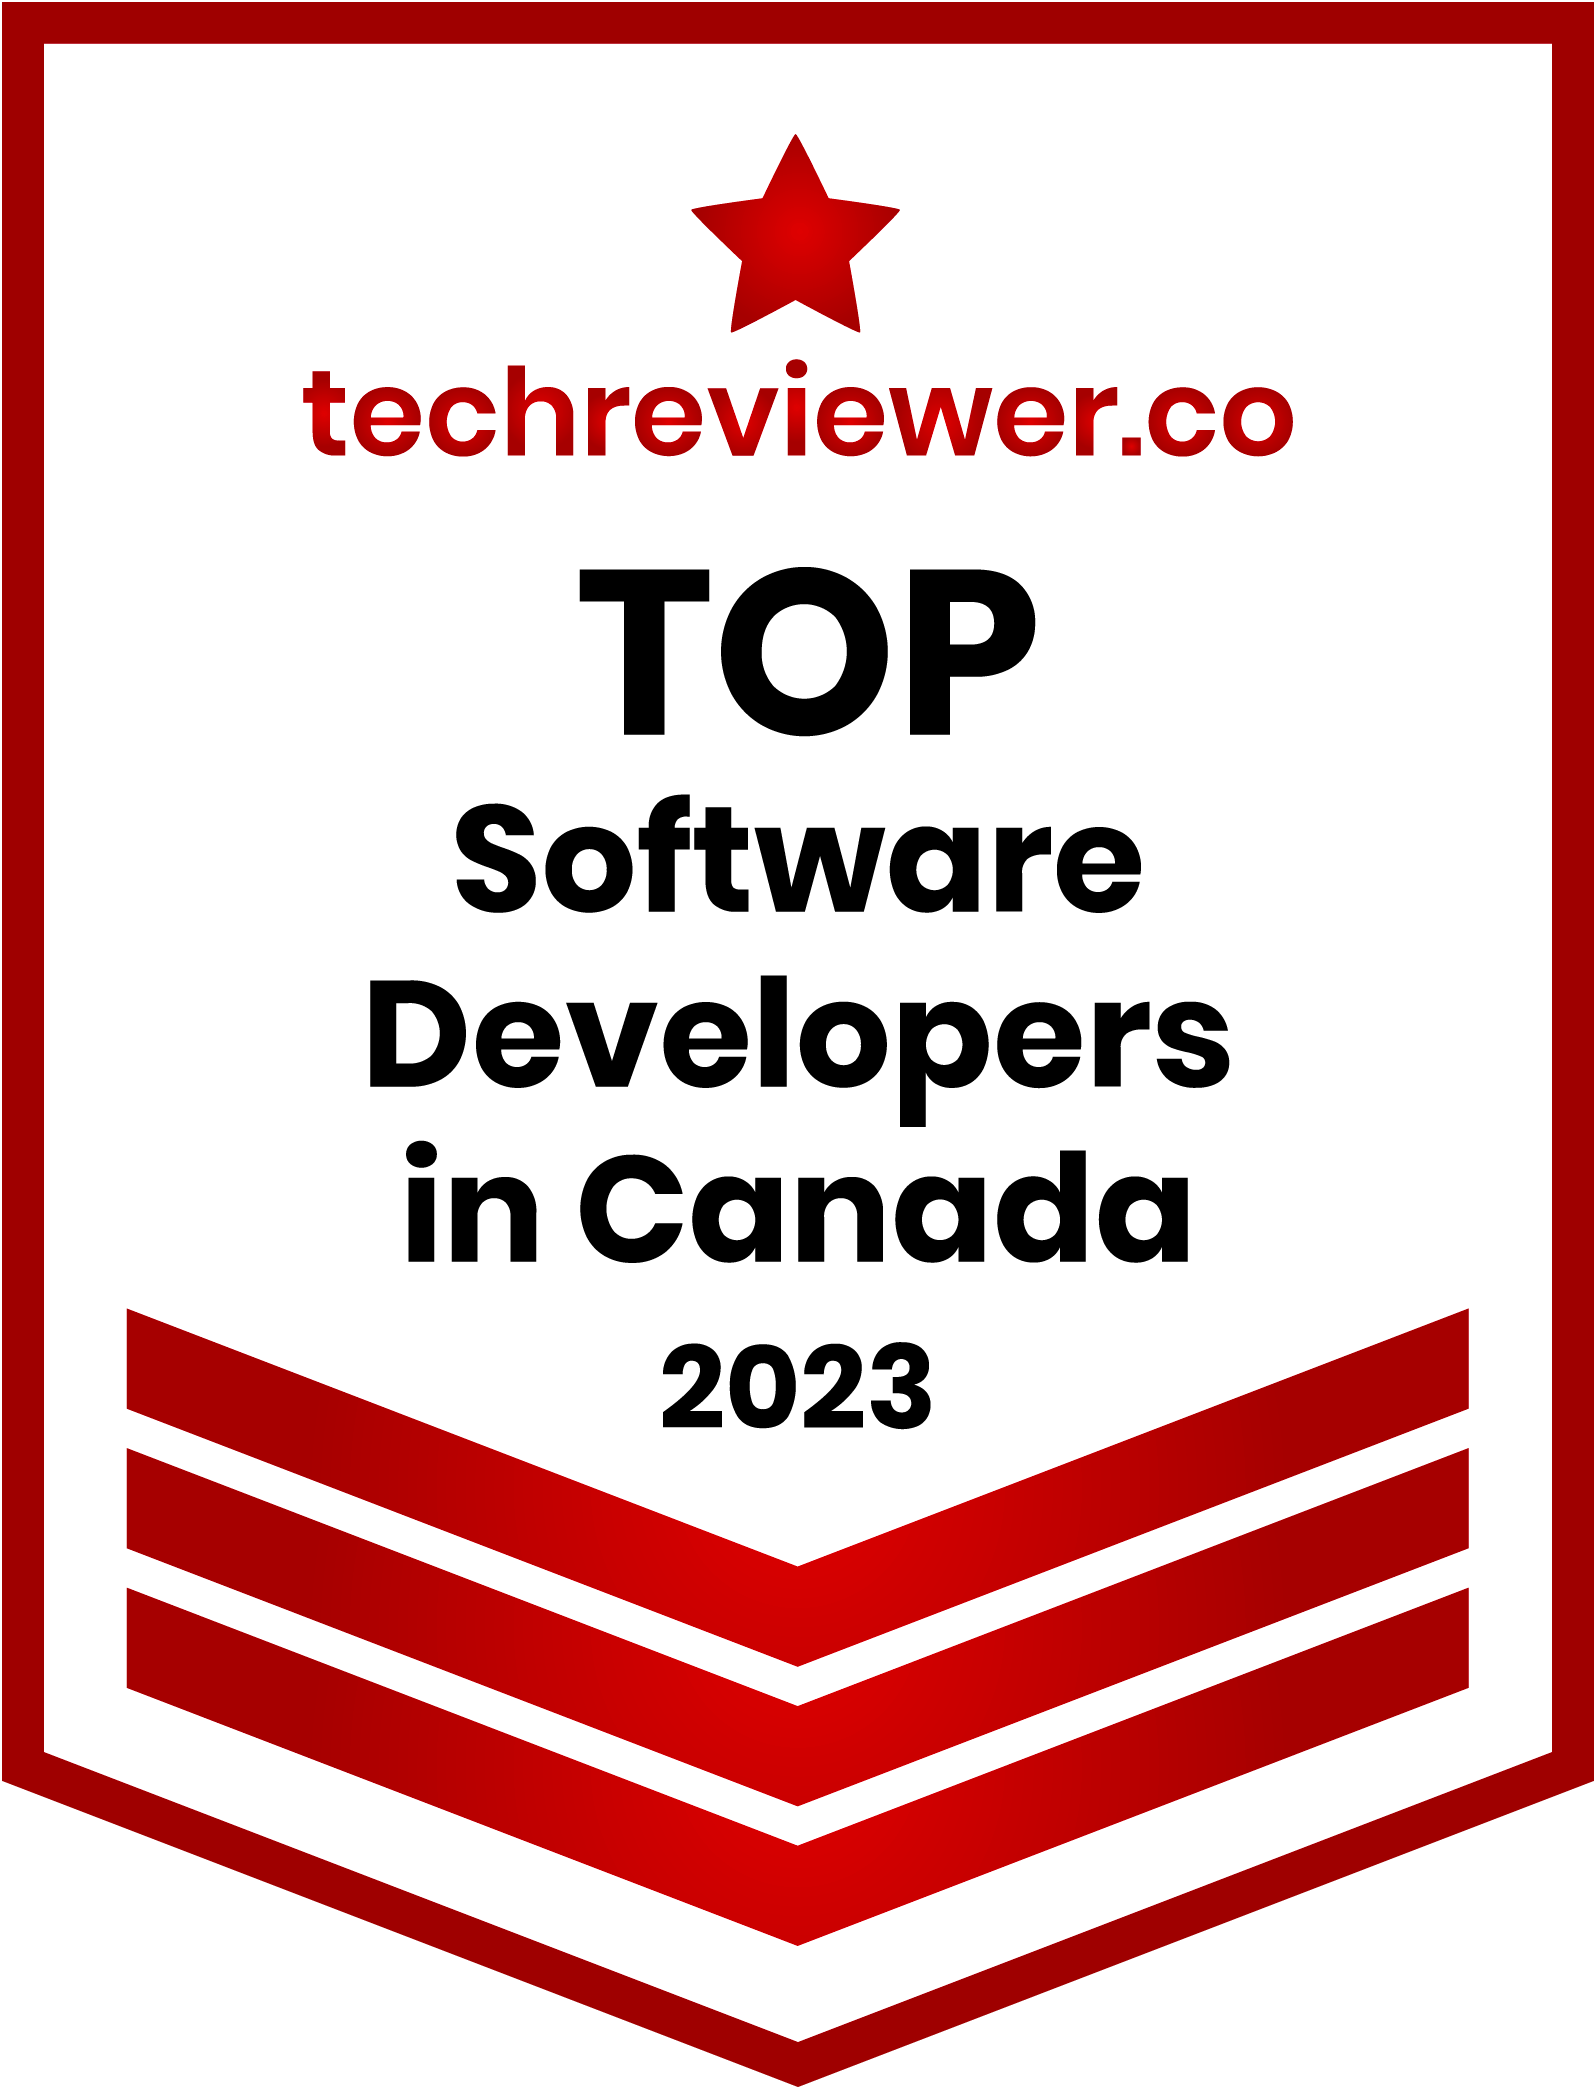 Raccoopack Media Named Among Canada's Top Software Development Companies in 2023 by Techreviewer.co